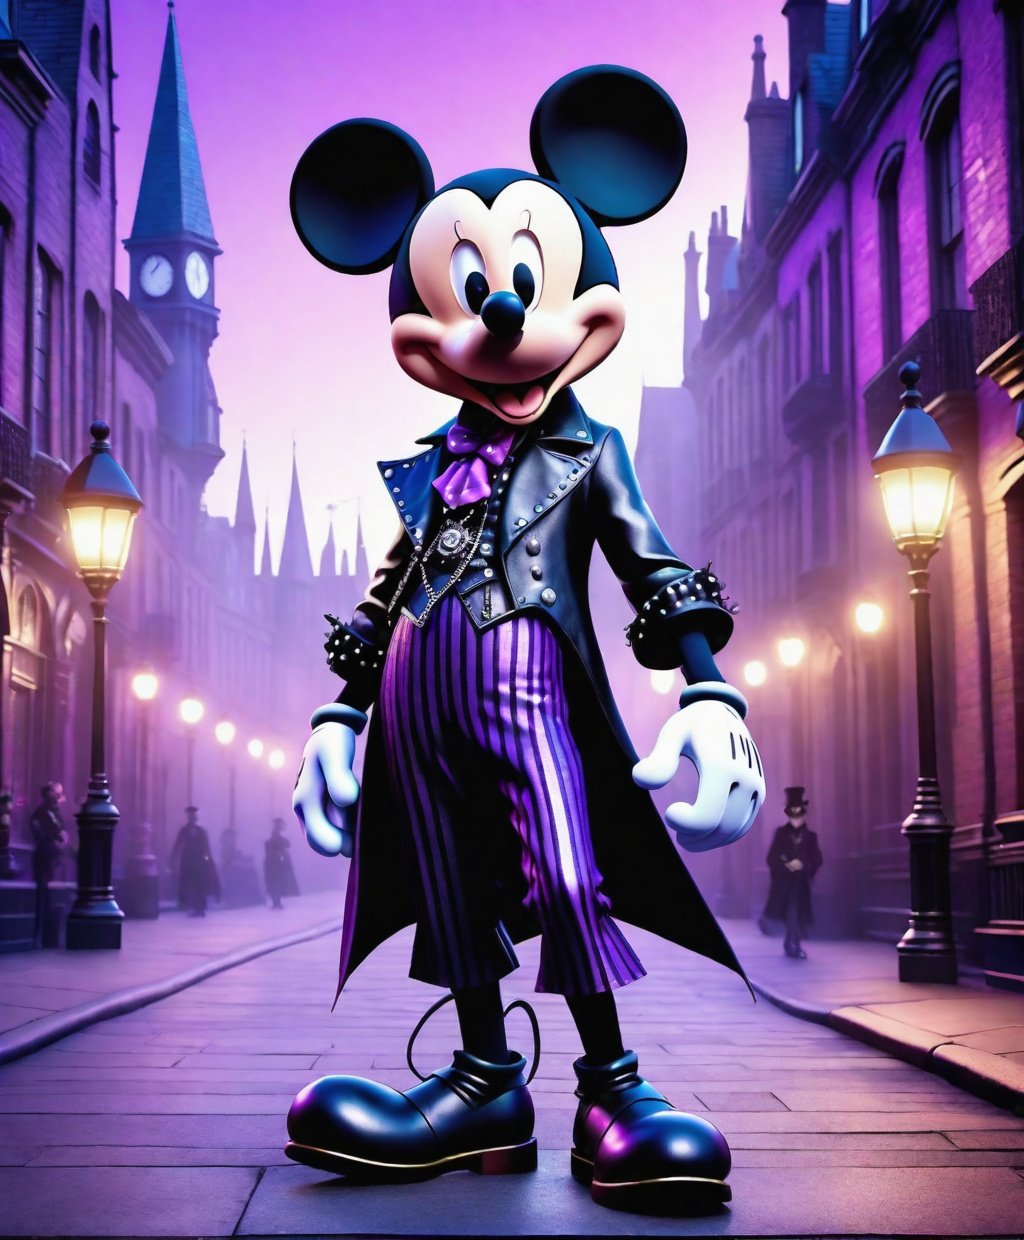 punk rock fusion of a villain Micky Mouse, full body, edwardian city, gothic punk, faint purple gradient in background, UHD render, lush post processing, photorealistic, high resolution, 4k